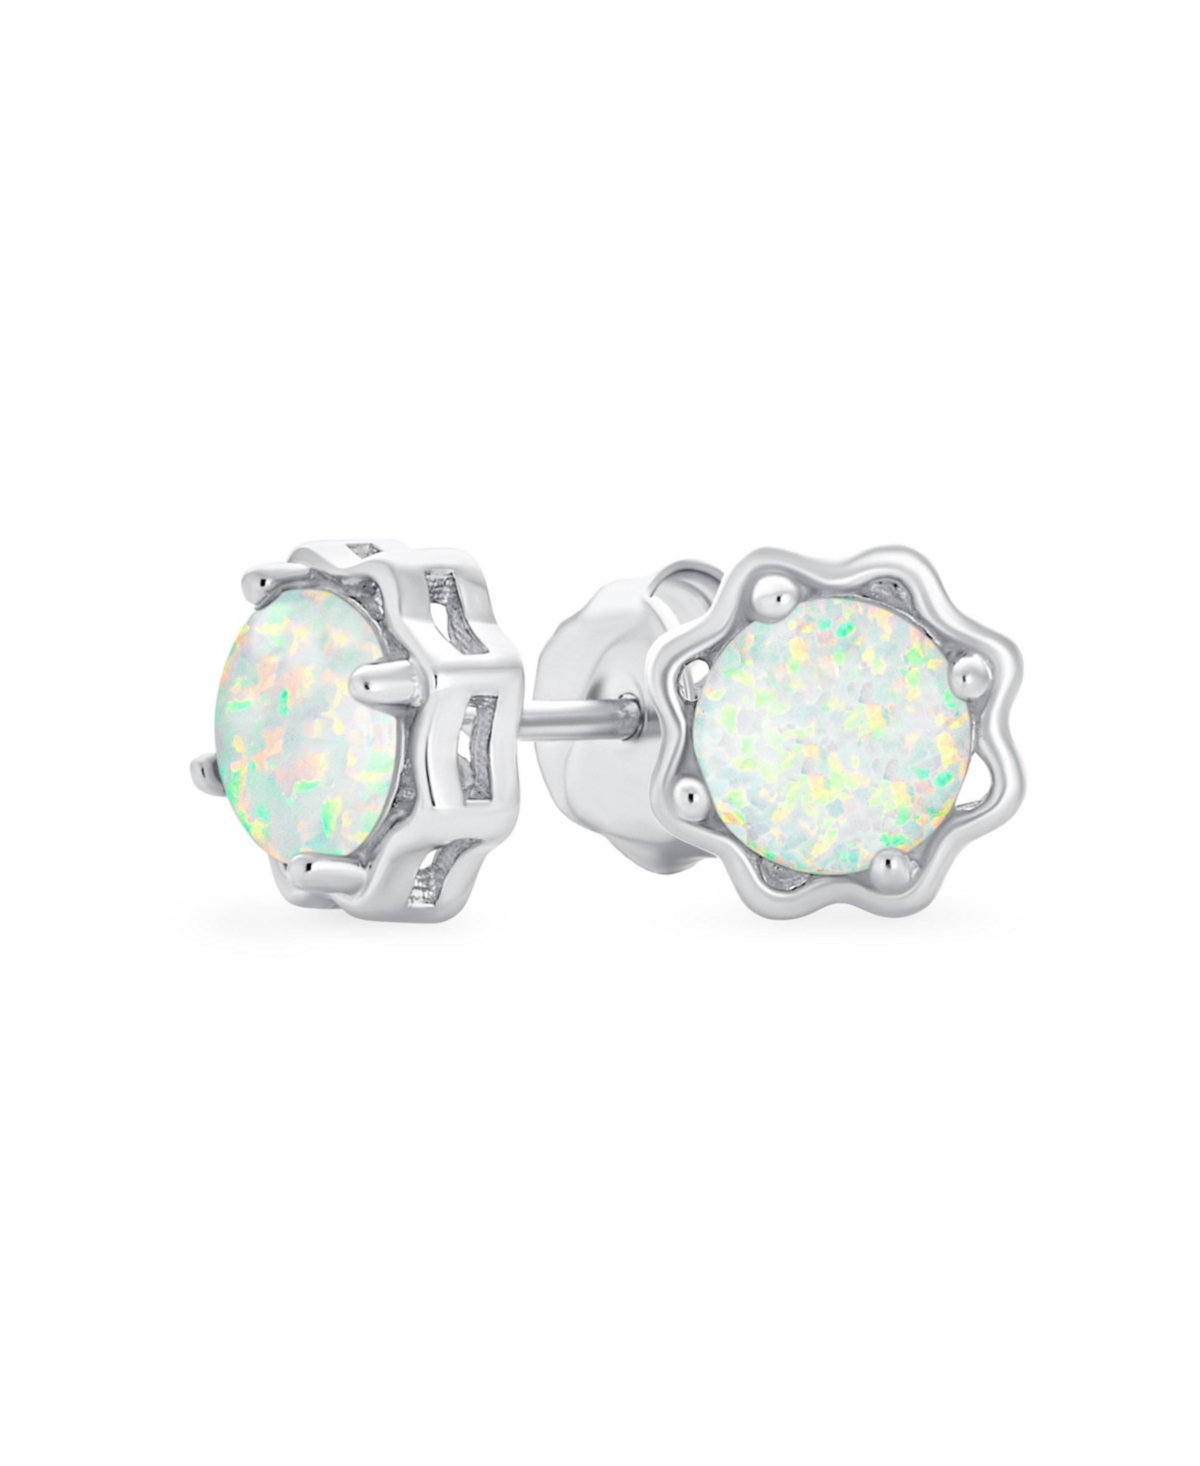 Gemstone Round 1.5 Ctw Solitaire Created White Opal Stud Earrings For Women Flower Basket Setting .925 Sterling Silver October Birthstone - Opal